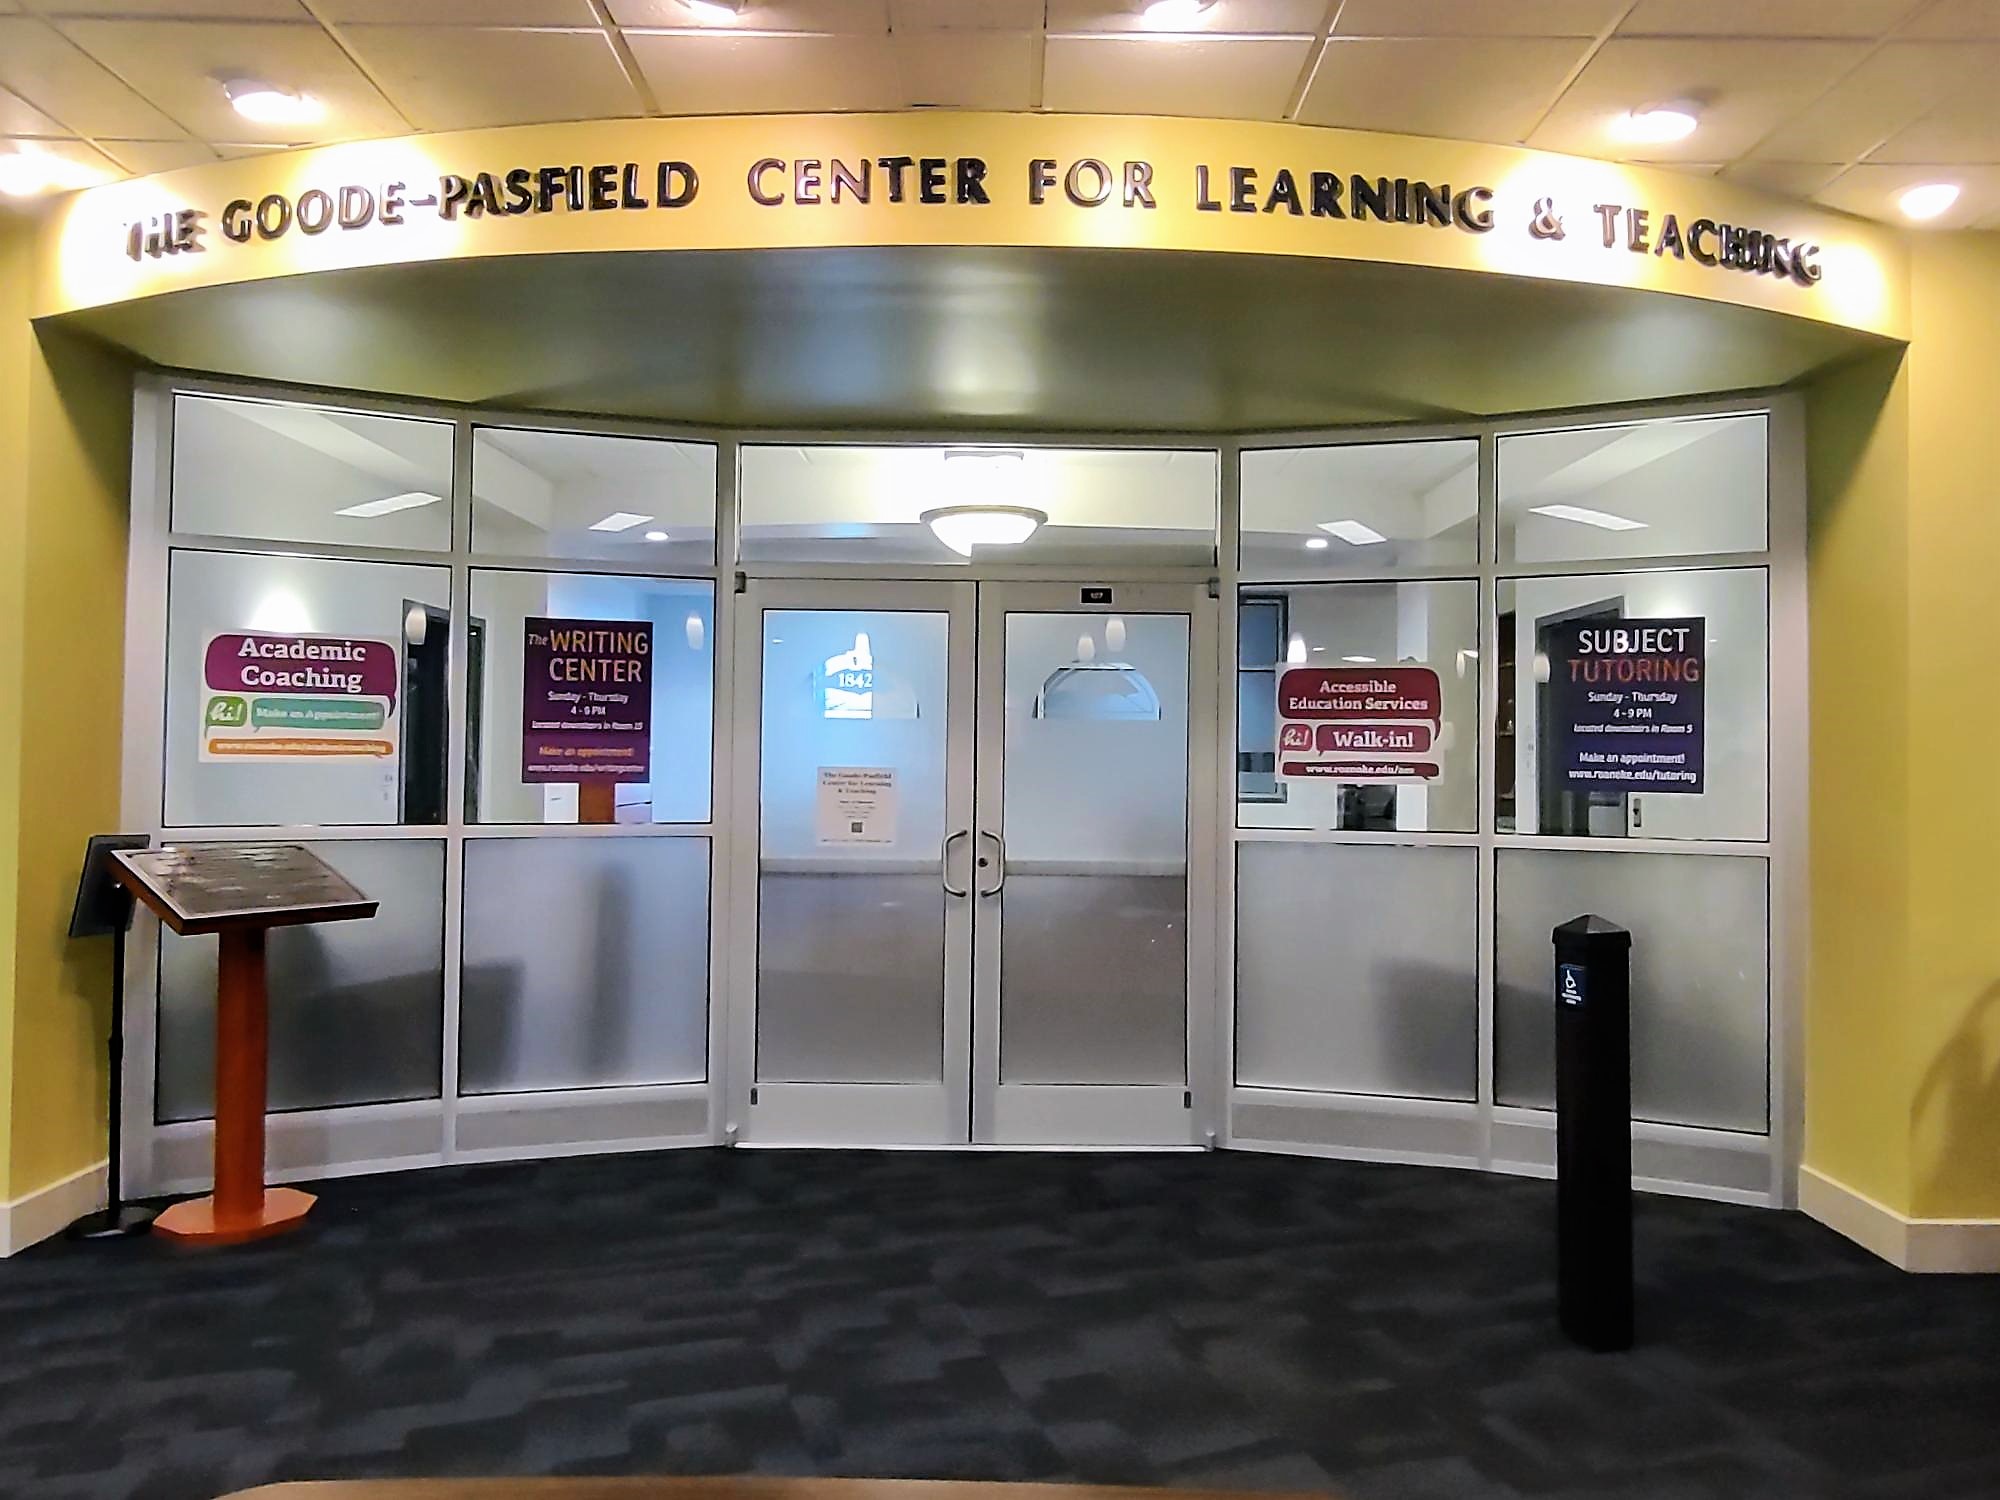 The Goode-Pasfield Center for Learning and Teaching located in Fintel Library